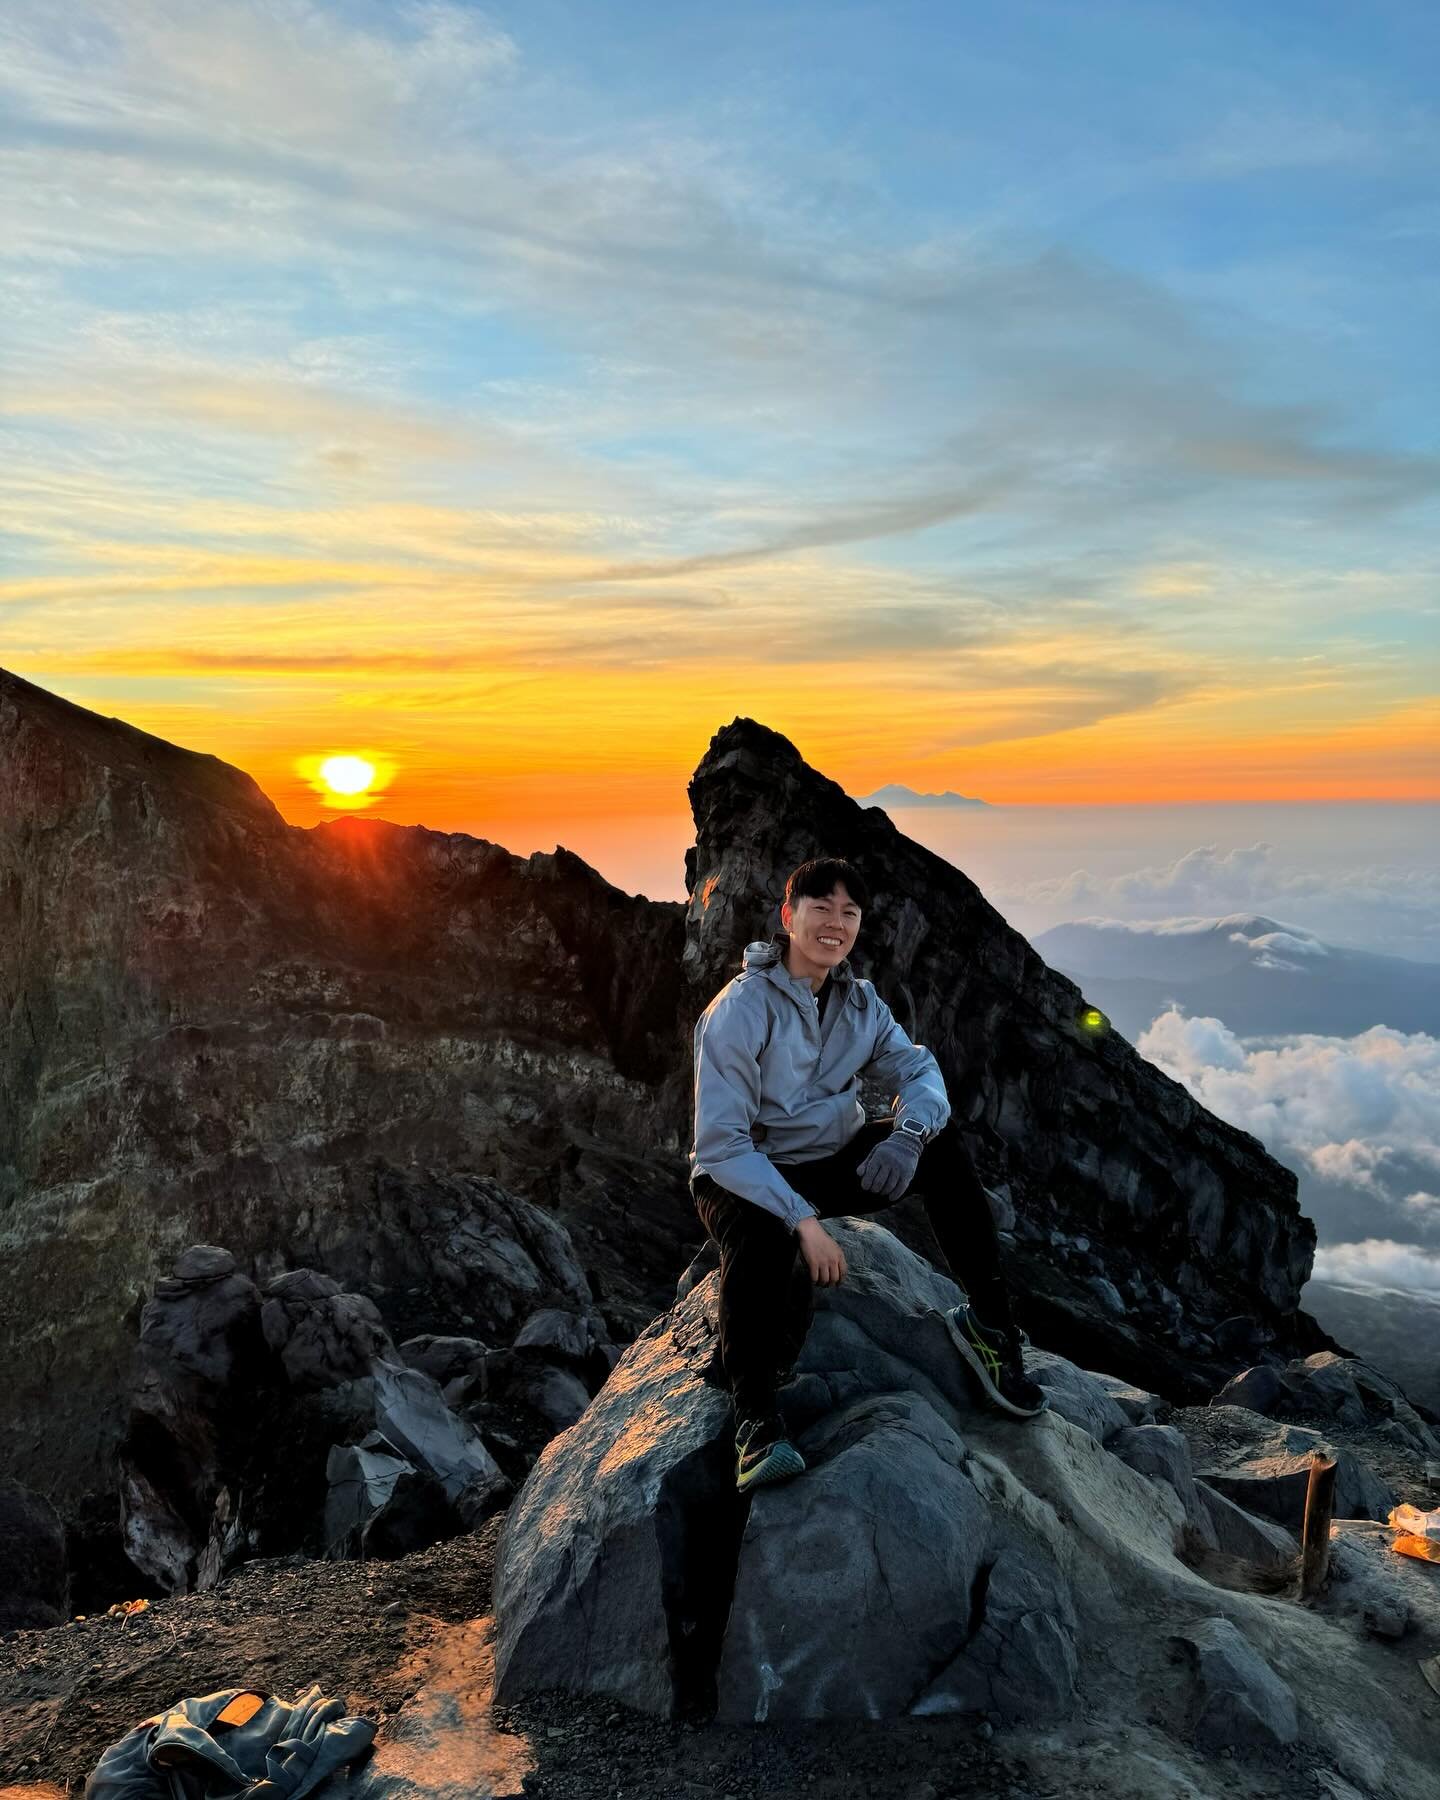 Mount Agung Bali ✅

Seven years ago, I felt immense pride as I witnessed Mount Agung while ascending Mount Batur. However, I quickly learned that climbing Agung is not for the faint-hearted. Reaching its summit demands intense determination, exceptio